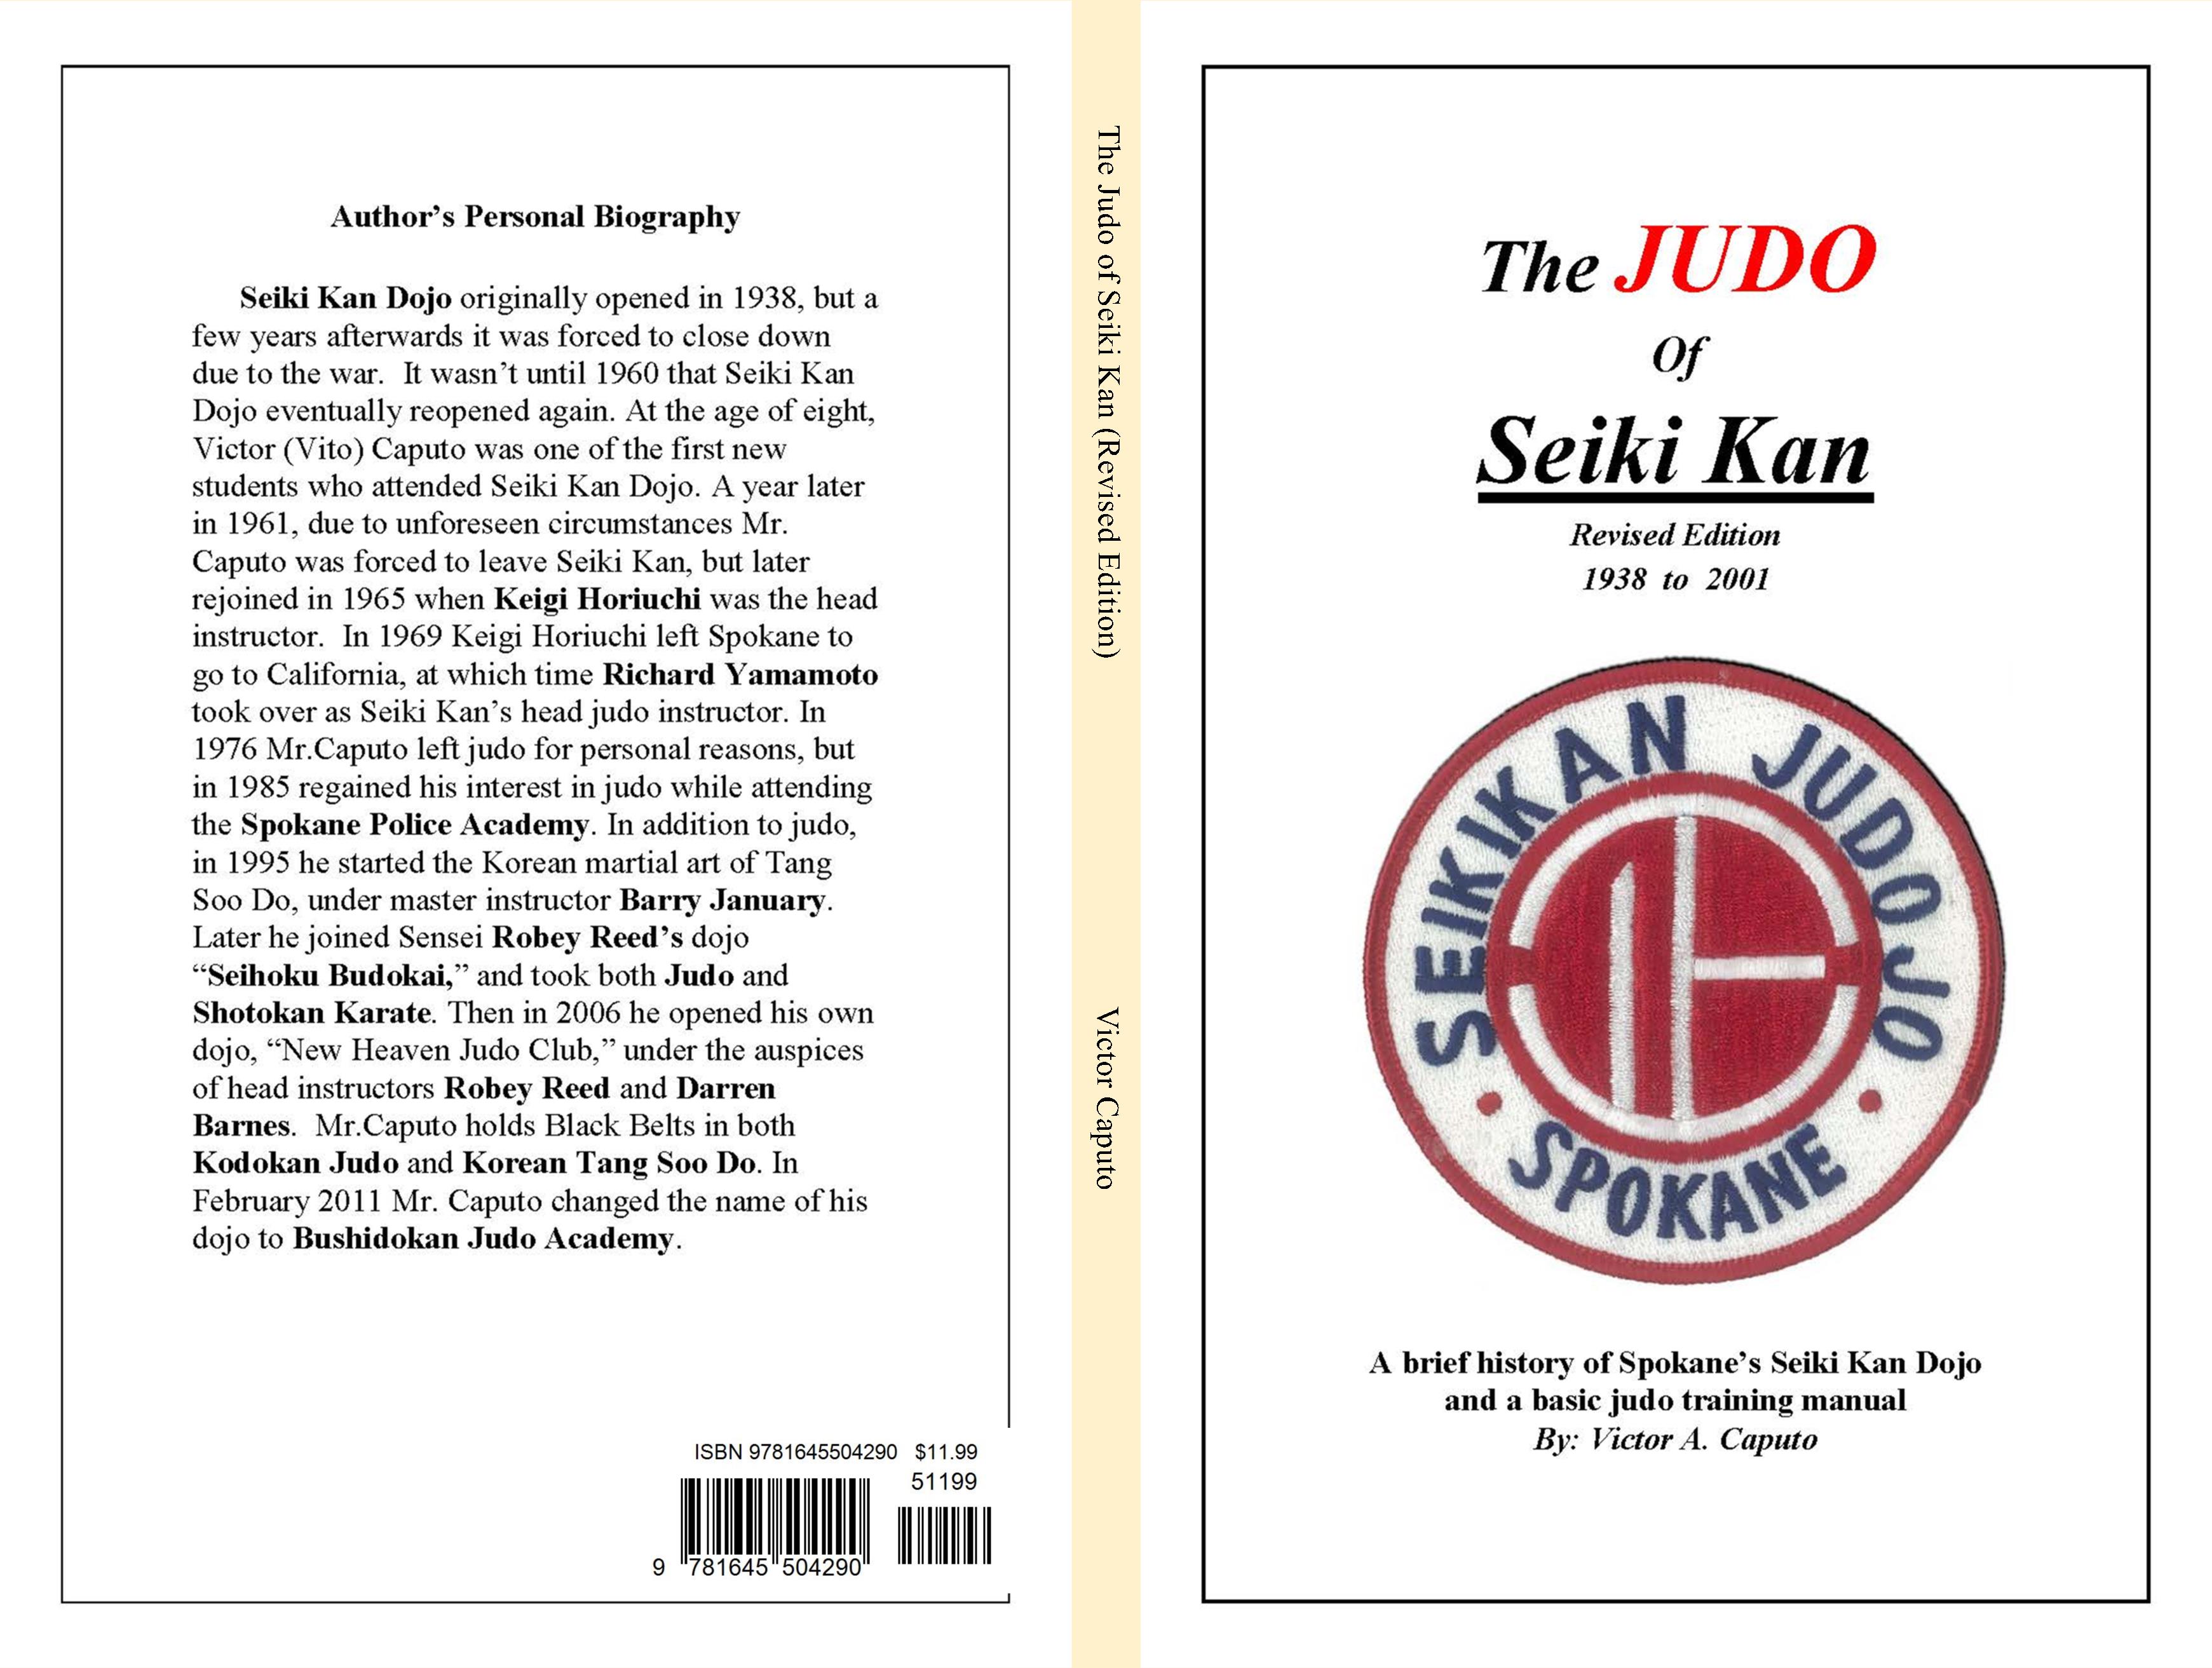 The Judo of Seiki Kan (Revised Edition) cover image